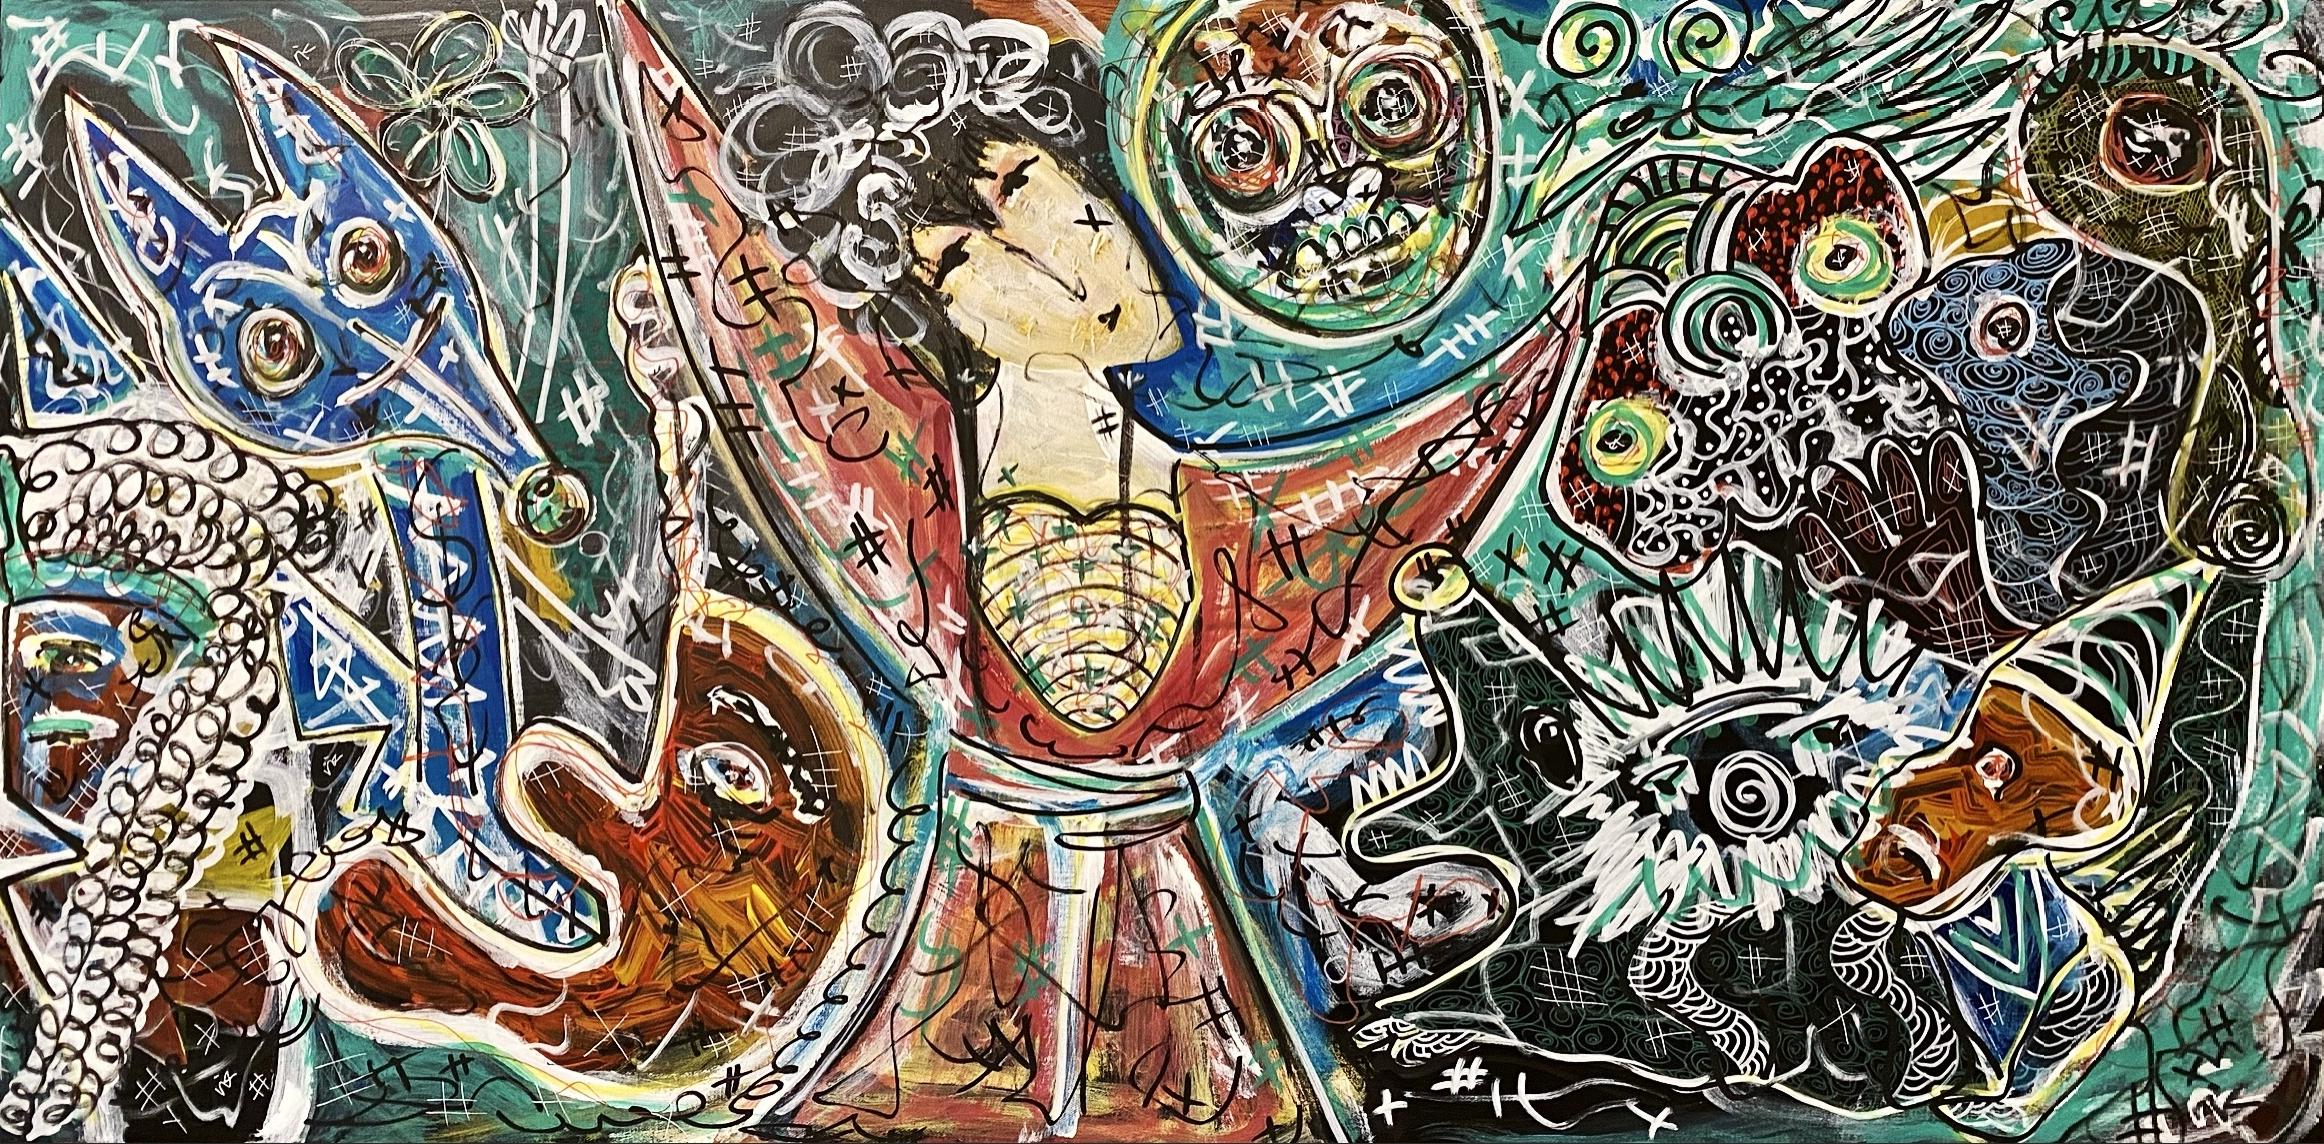 A vibrant and chaotic abstract expressionist mural featuring various surreal and stylized creatures with multiple eyes, juxtaposed with graffiti-like scribbles and symbols.